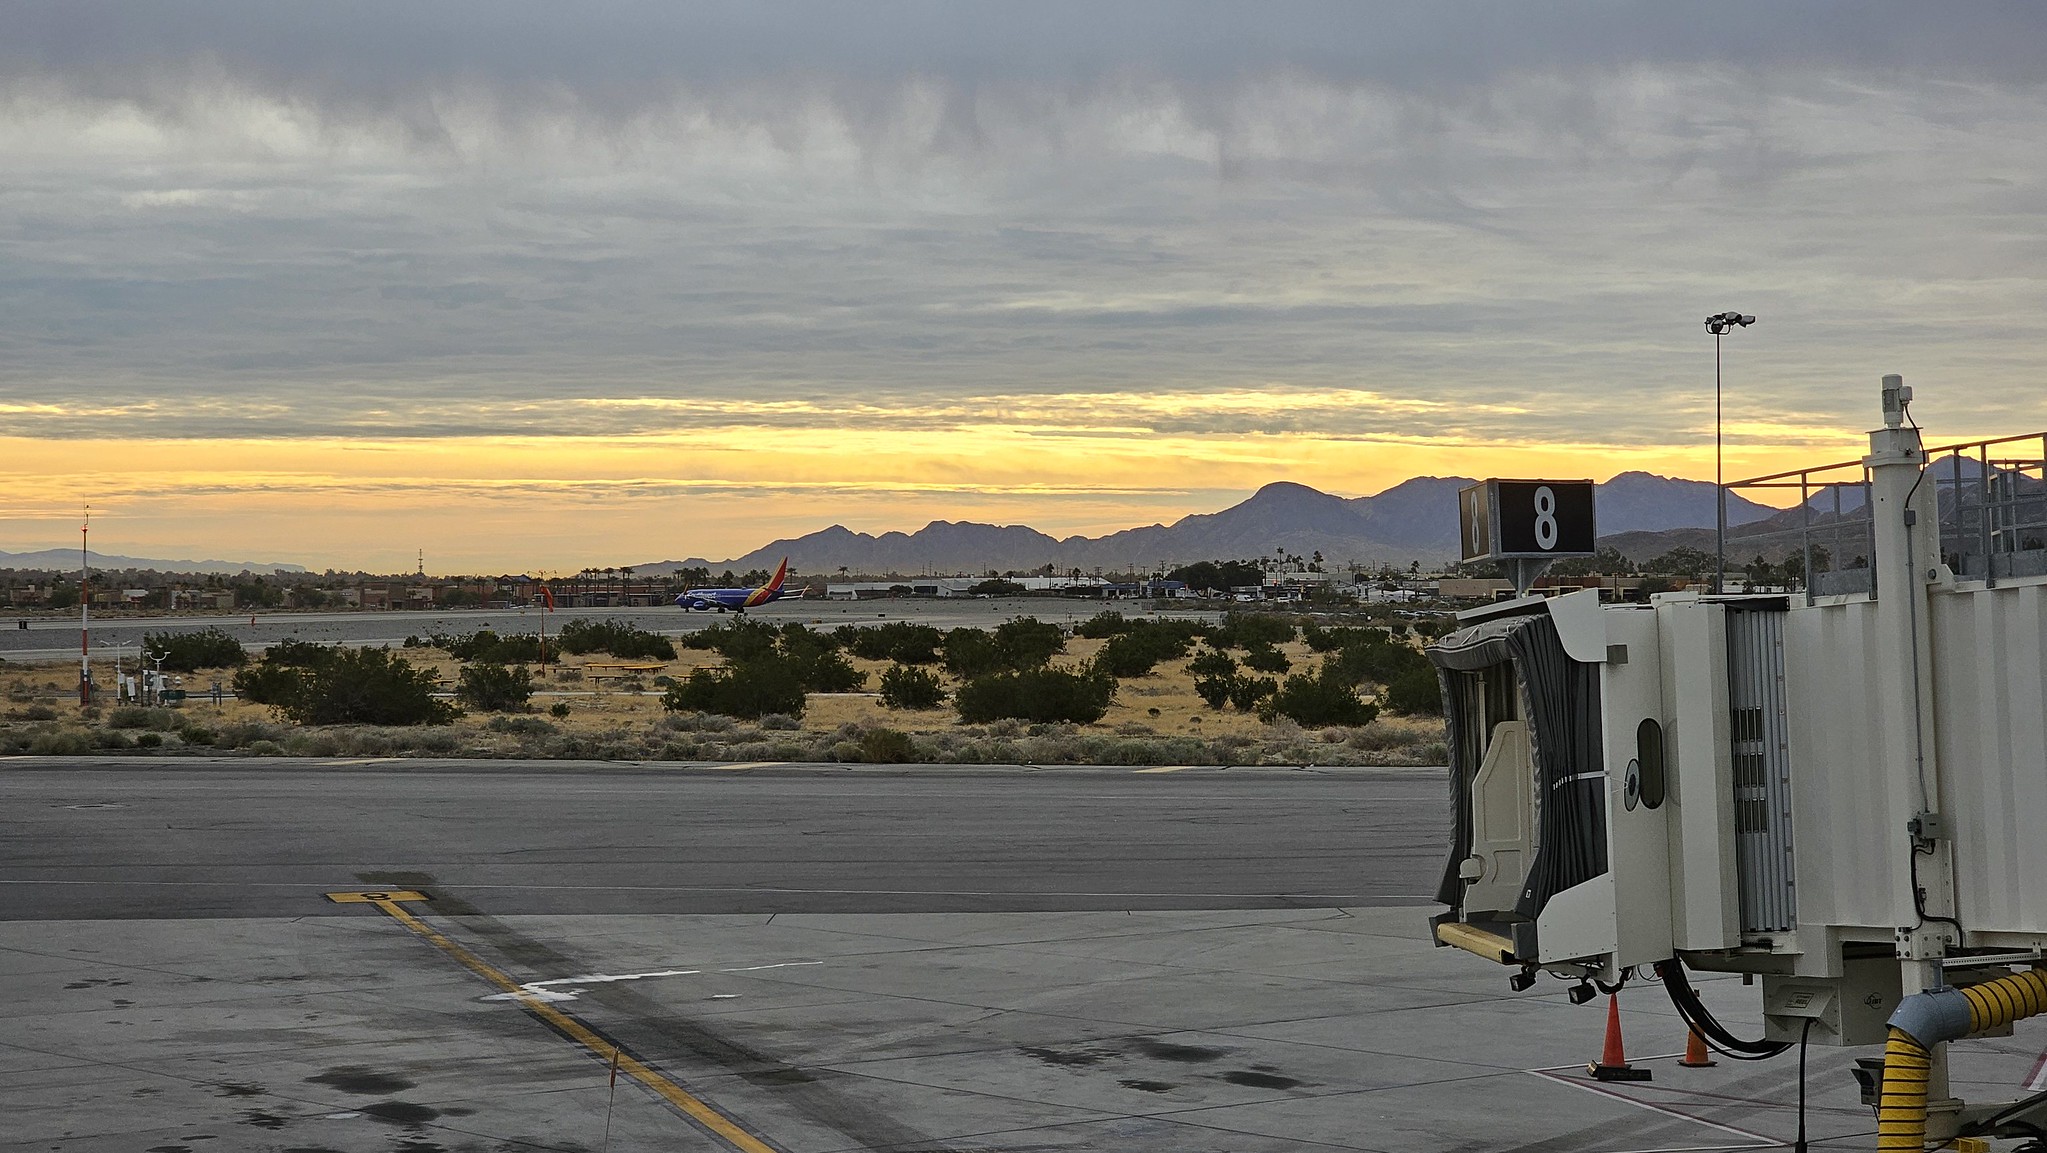 Sunrise at Palm Springs Airport